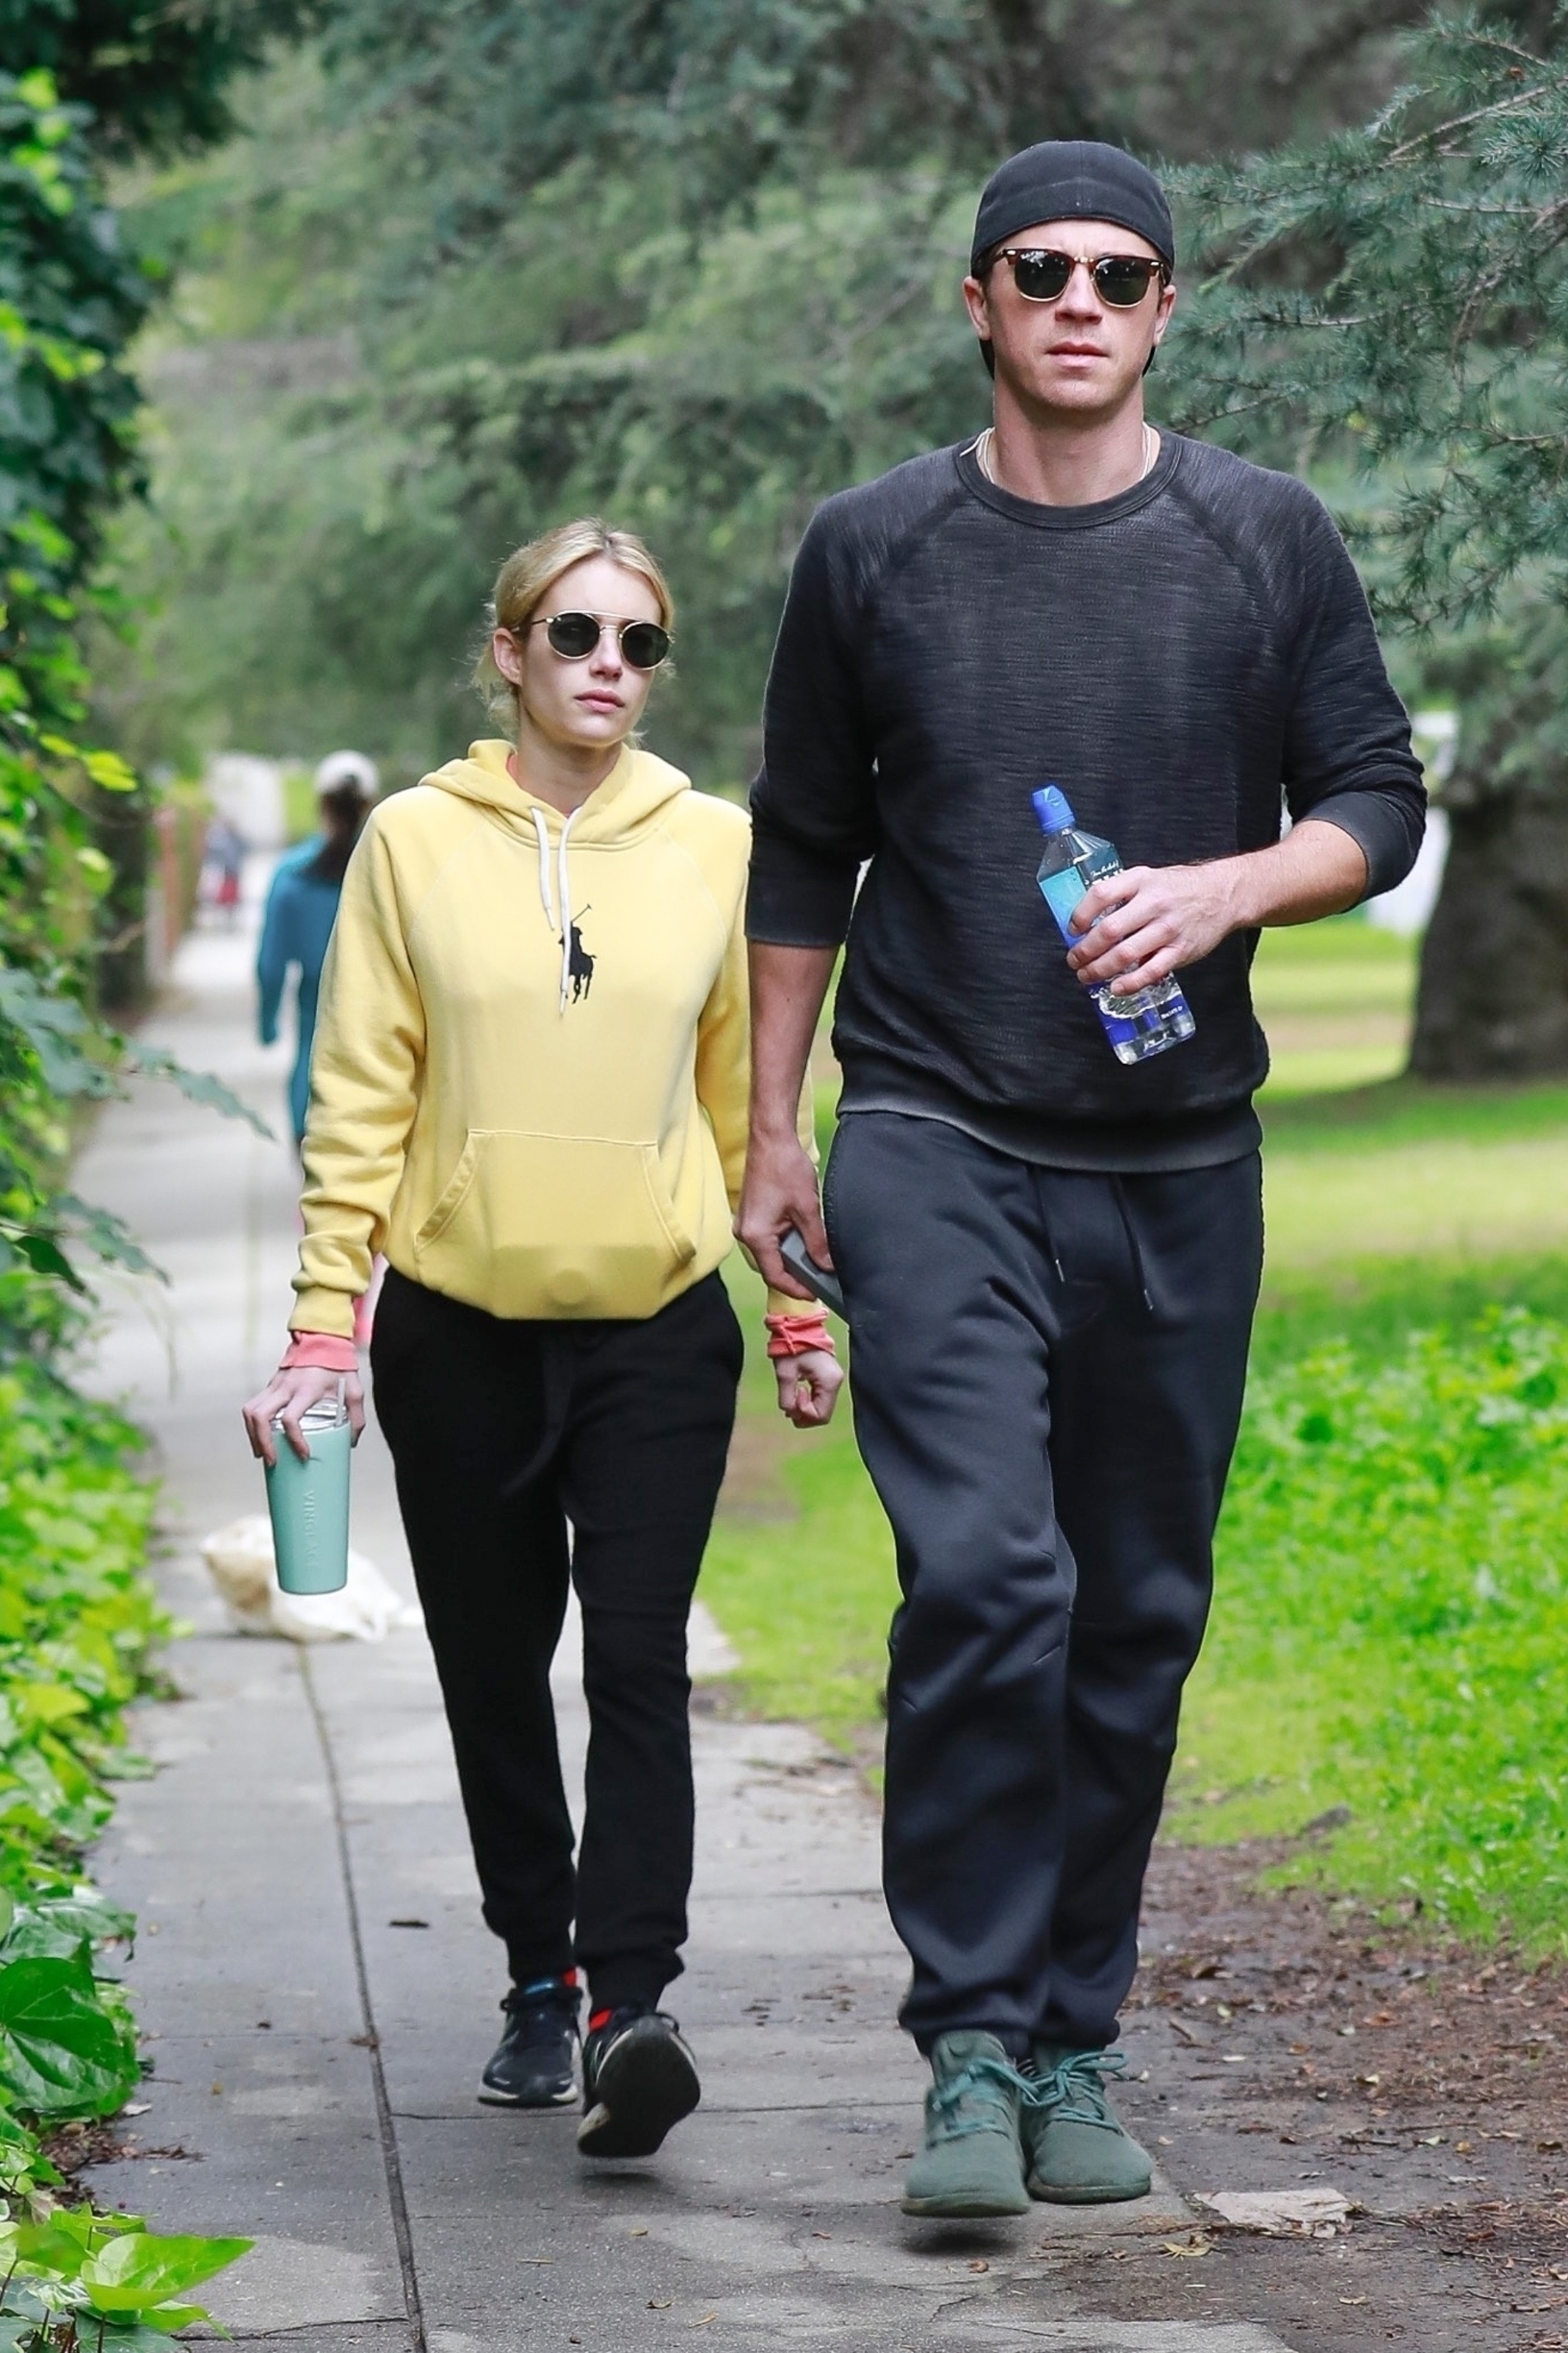 Los Feliz, CA  - *EXCLUSIVE*  - Emma Roberts and her beau Garrett Hedlund arrive for a hike on the hills of the Griffith Observatory in Los Angeles.

BACKGRID USA 19 MARCH 2020,Image: 507833209, License: Rights-managed, Restrictions: , Model Release: no, Credit line: Terma / BACKGRID / Backgrid USA / Profimedia